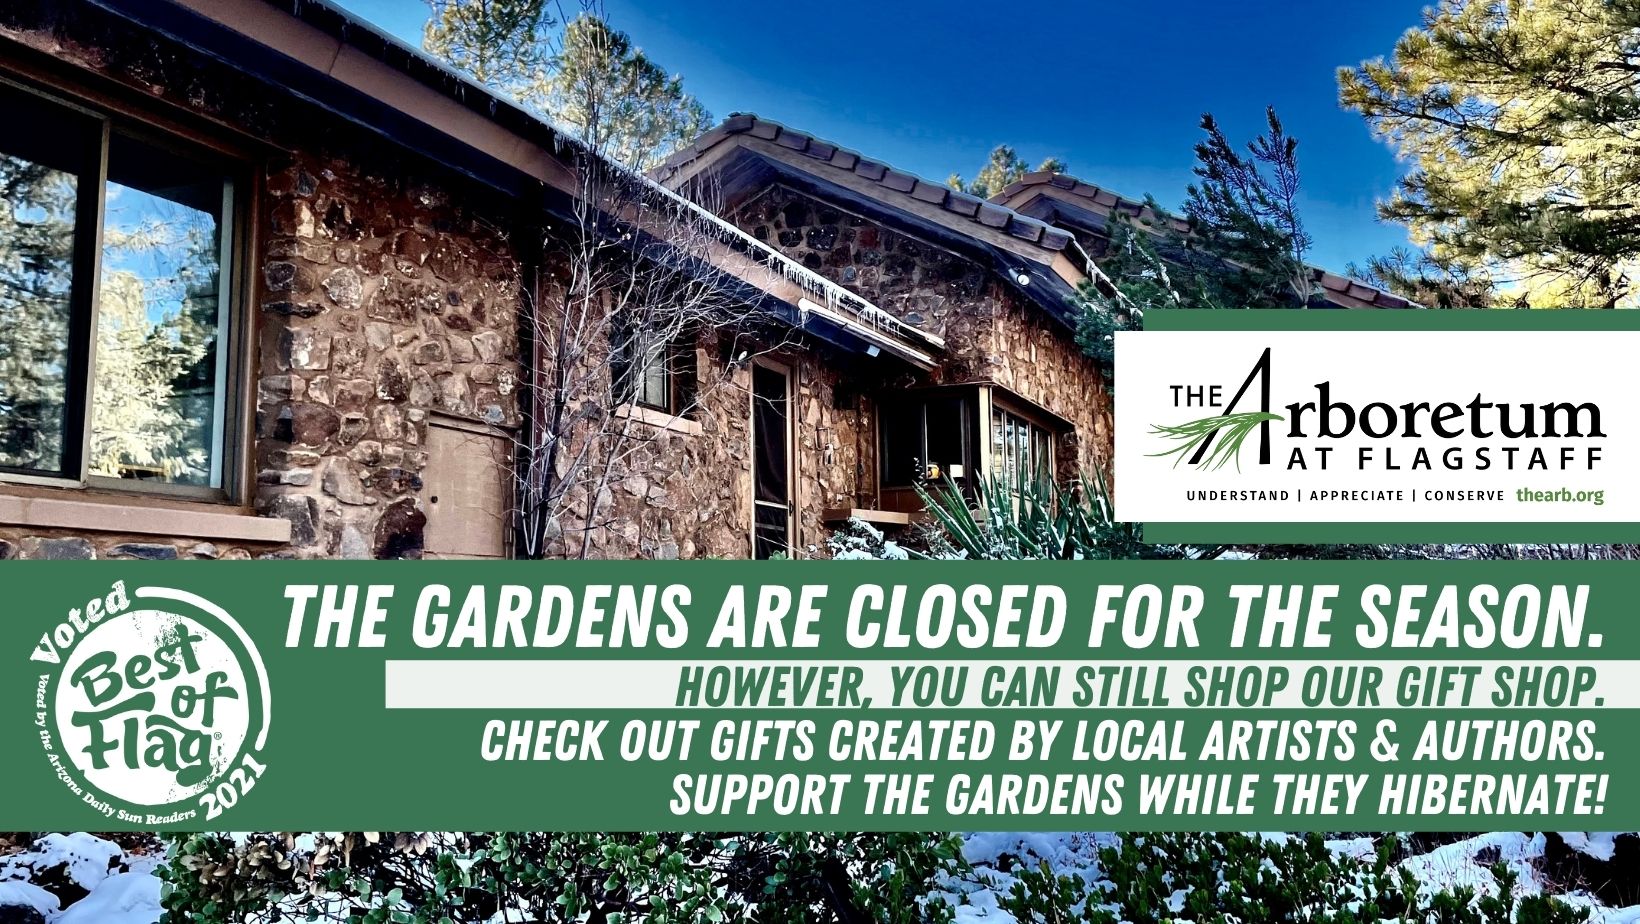 The Gardens are closed for the season, but you can still enjoy our online gift shop!